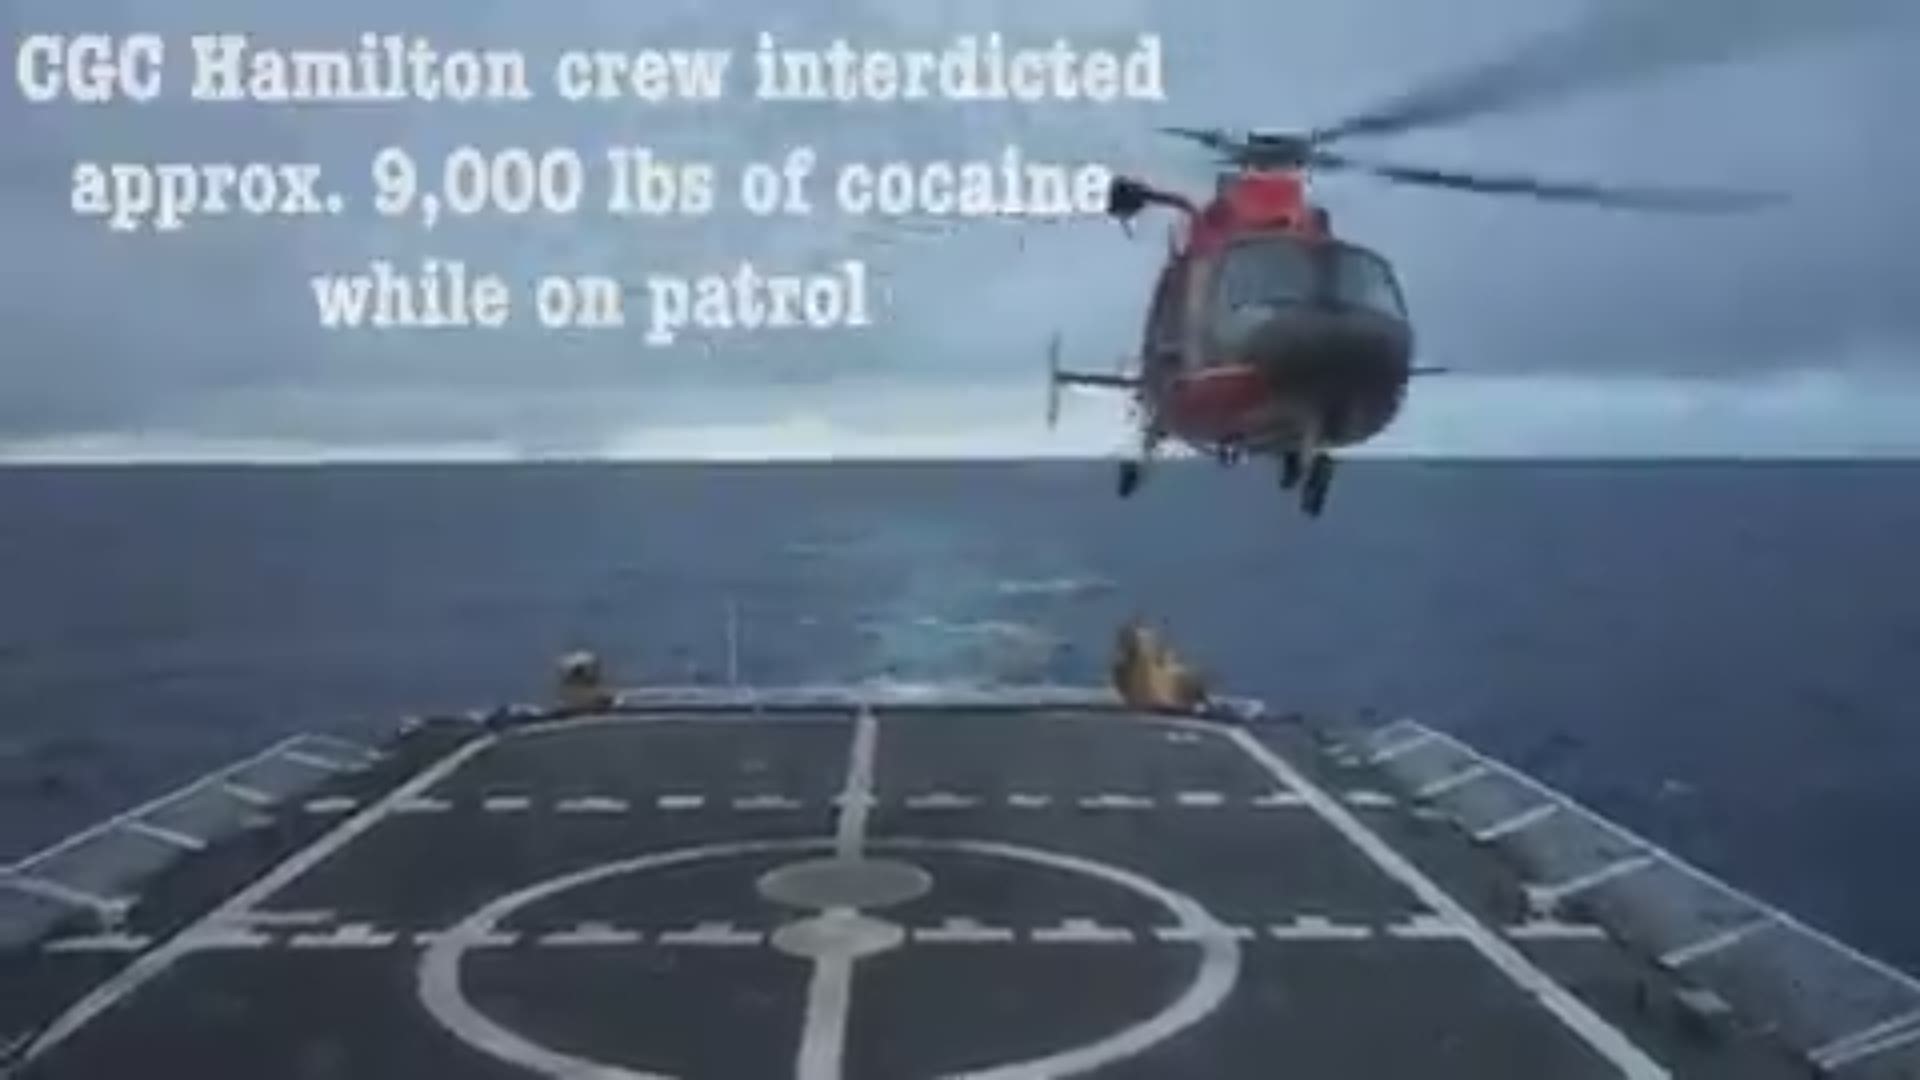 The U.S. Coast Guard will unload drugs seized in international waters off the coasts of Mexico and Central and South America.

Officials said in a news release that the agency will offload 26,000 pounds (11793 kilograms) of cocaine and 1,500 pounds (680 kilograms) of marijuana at Port Everglades in Fort Lauderdale on Thursday morning.